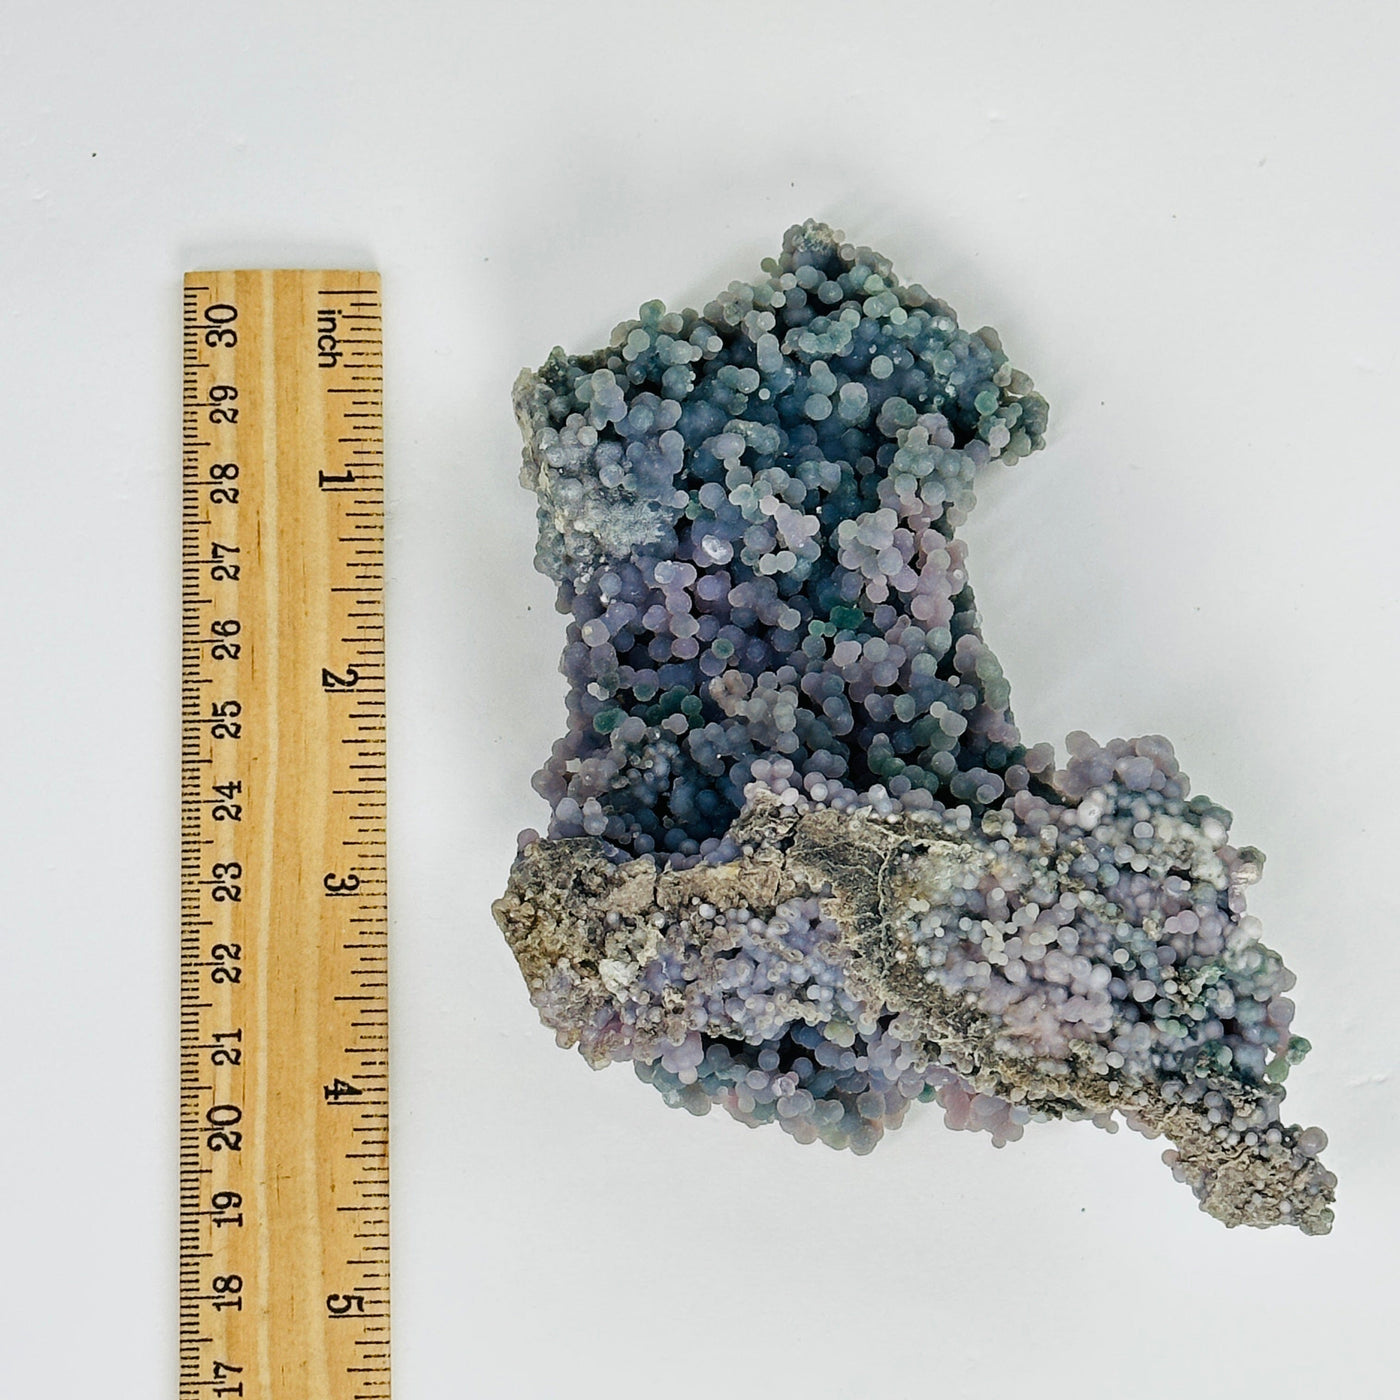 grape agate cluster next to a ruler for size reference